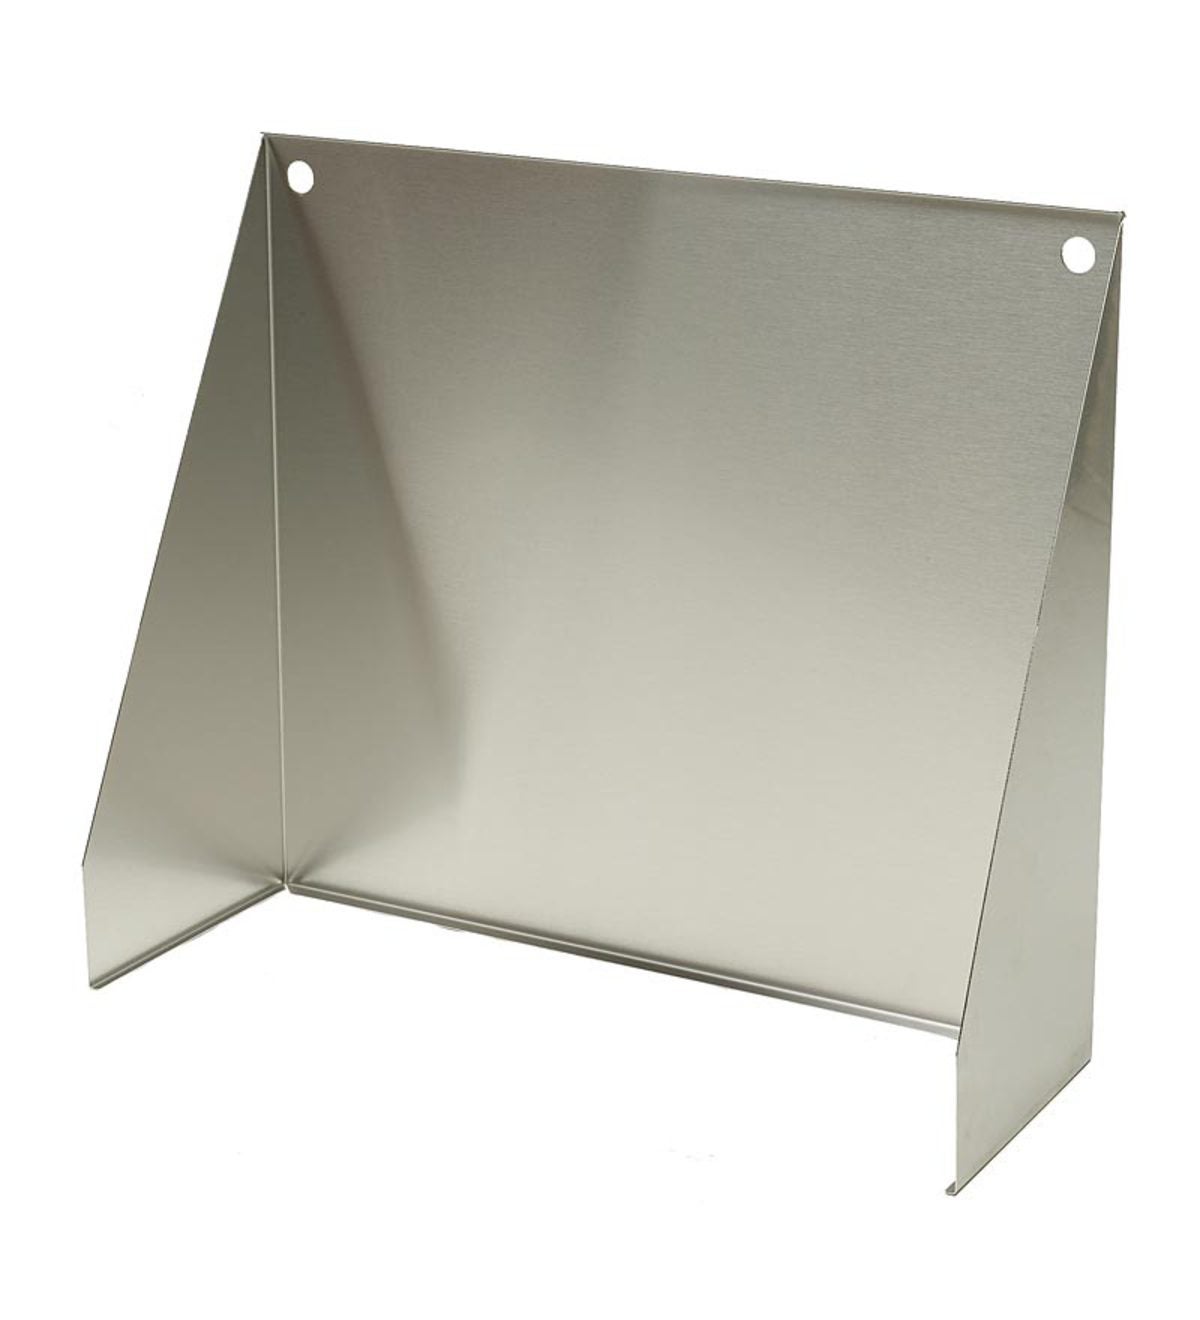 Stainless Steel Fireplace Reflector, 22"W